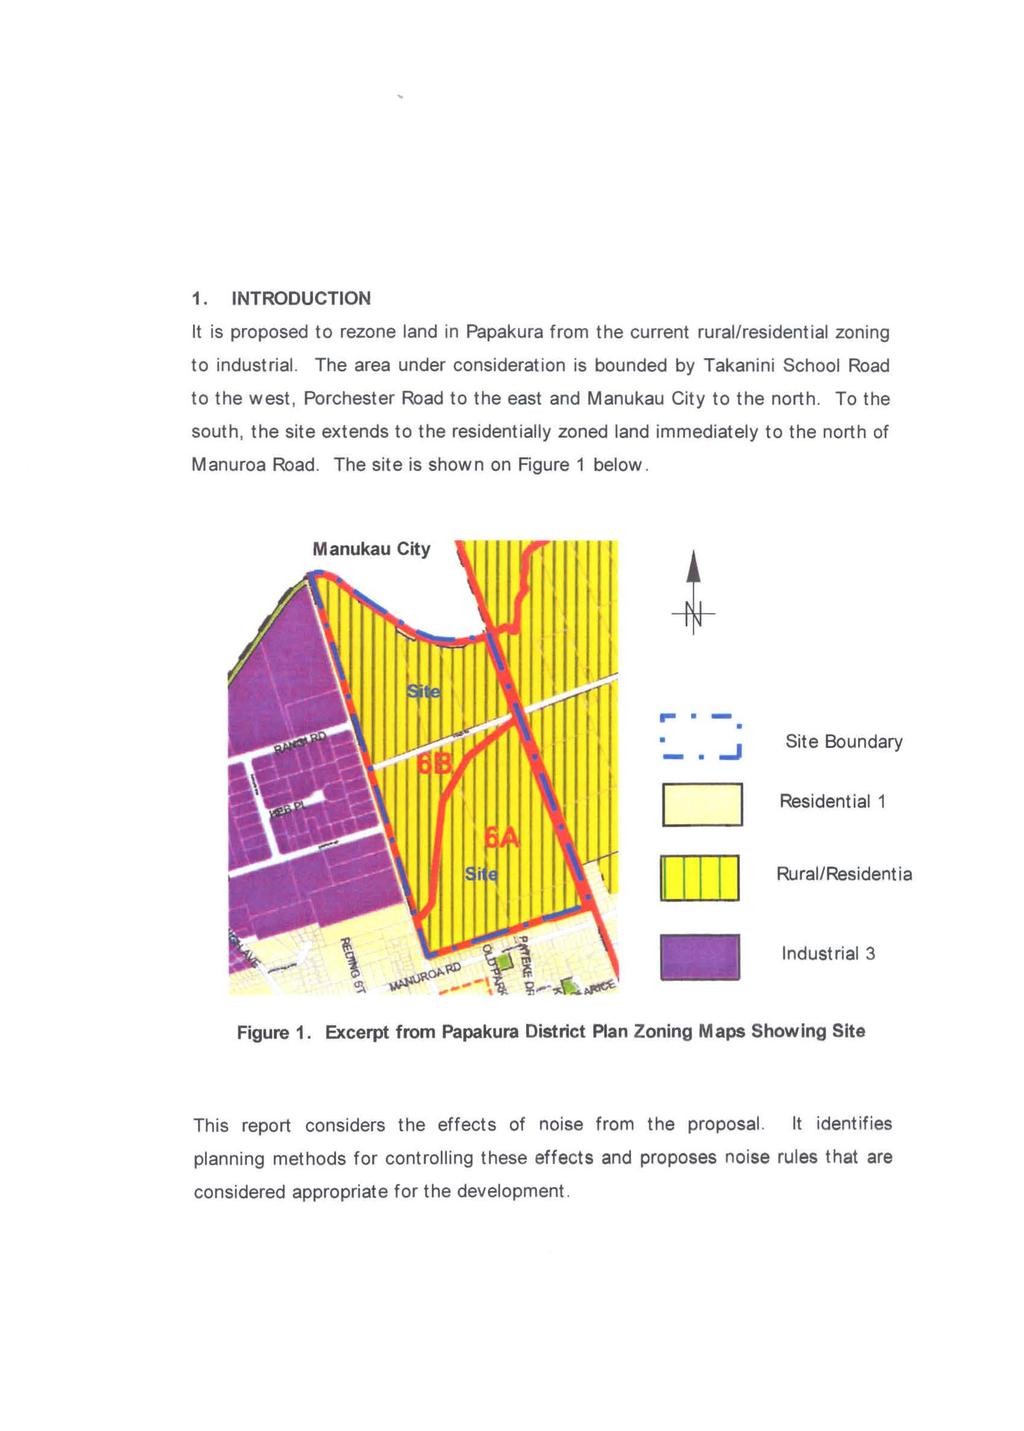 1. INTRODUCTION It is proposed to rezone land in Papakura from the current rural/residential zoning to industrial.